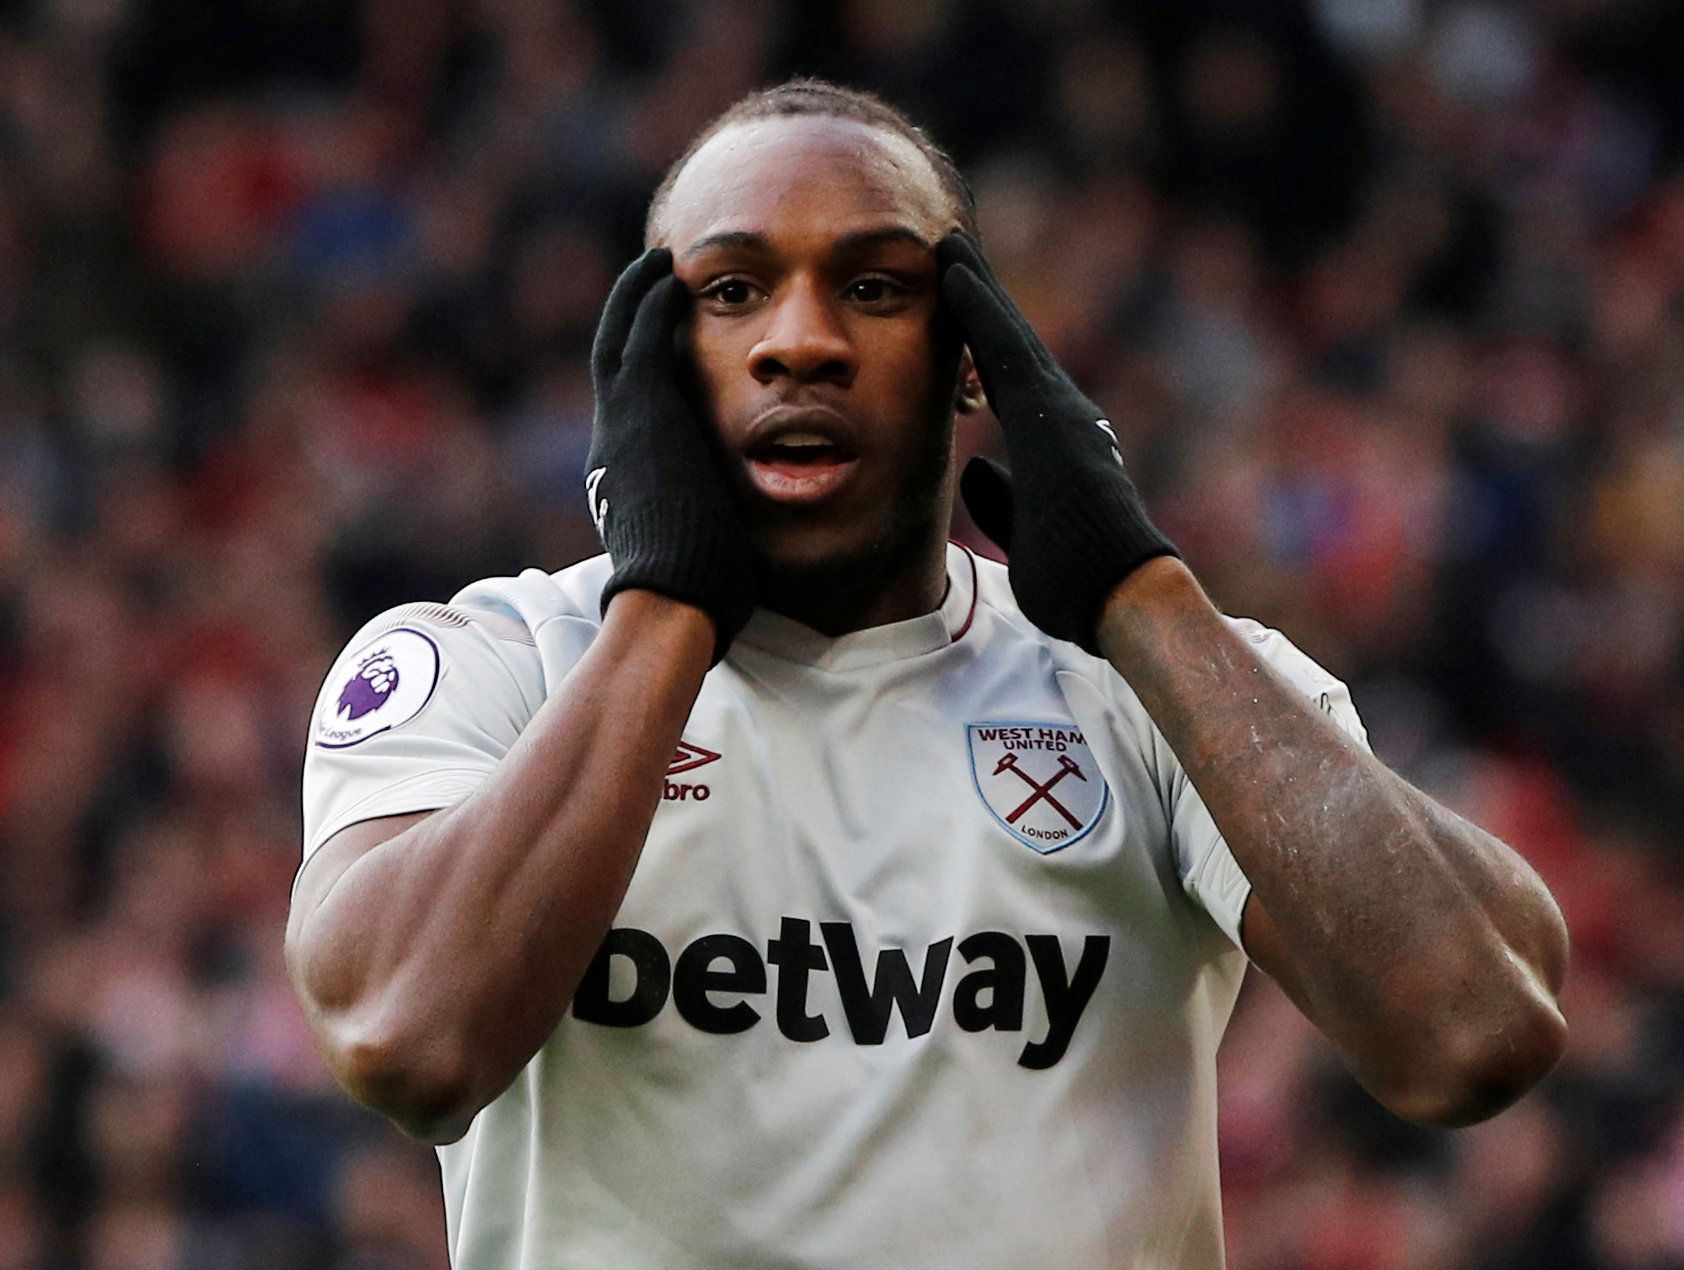 Soccer Football - Premier League - Manchester United v West Ham United - Old Trafford, Manchester, Britain - April 13, 2019  West Ham's Michail Antonio reacts after missing a chance to score                      REUTERS/Phil Noble  EDITORIAL USE ONLY. No use with unauthorized audio, video, data, fixture lists, club/league logos or 